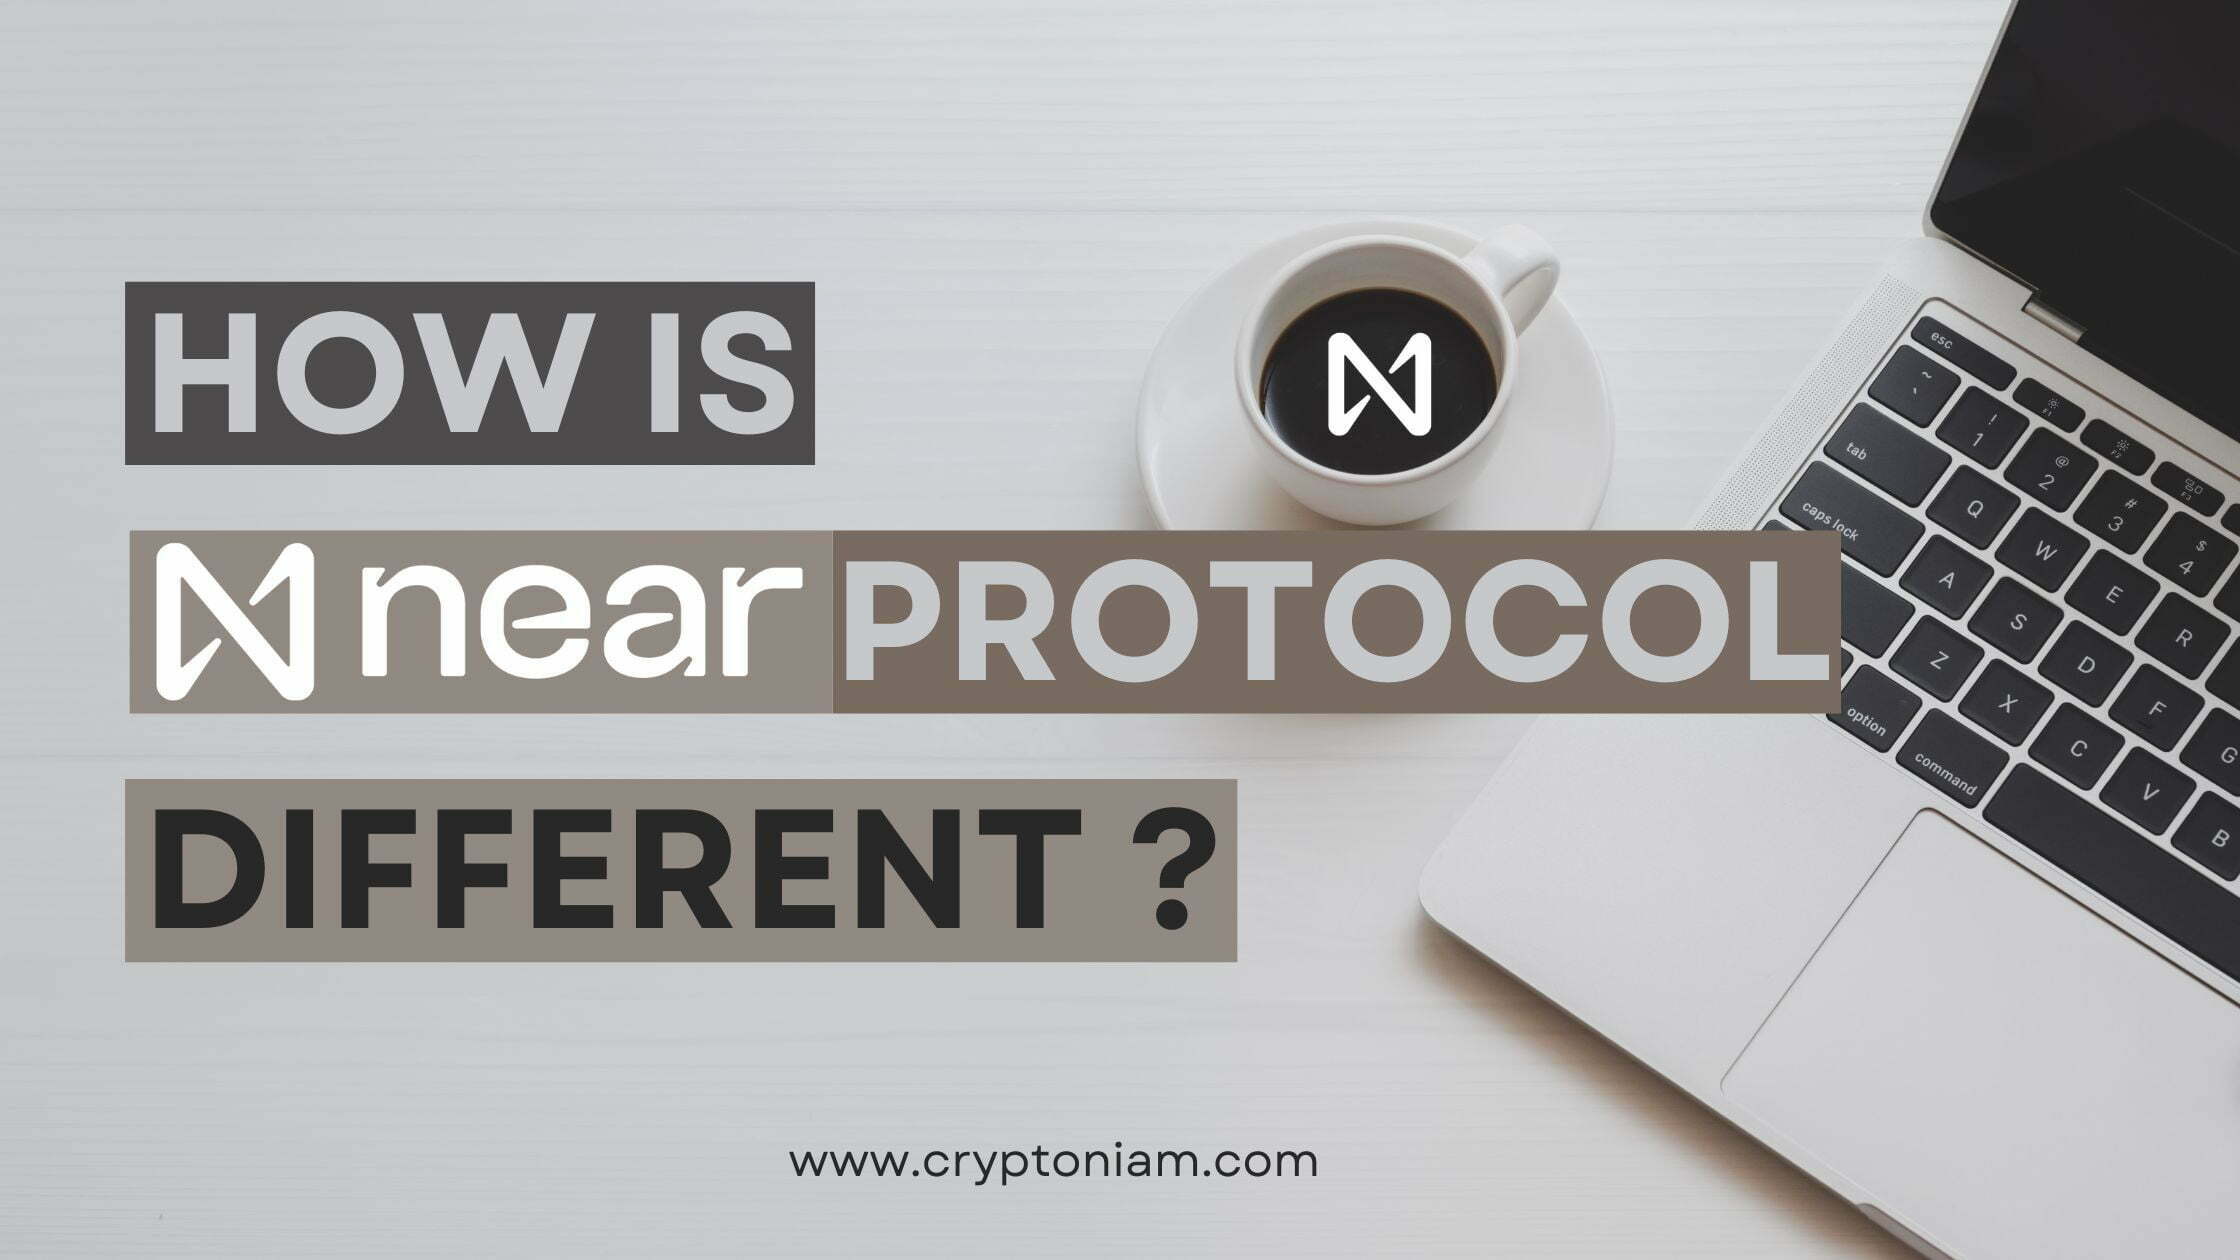 How is Near Protocol different